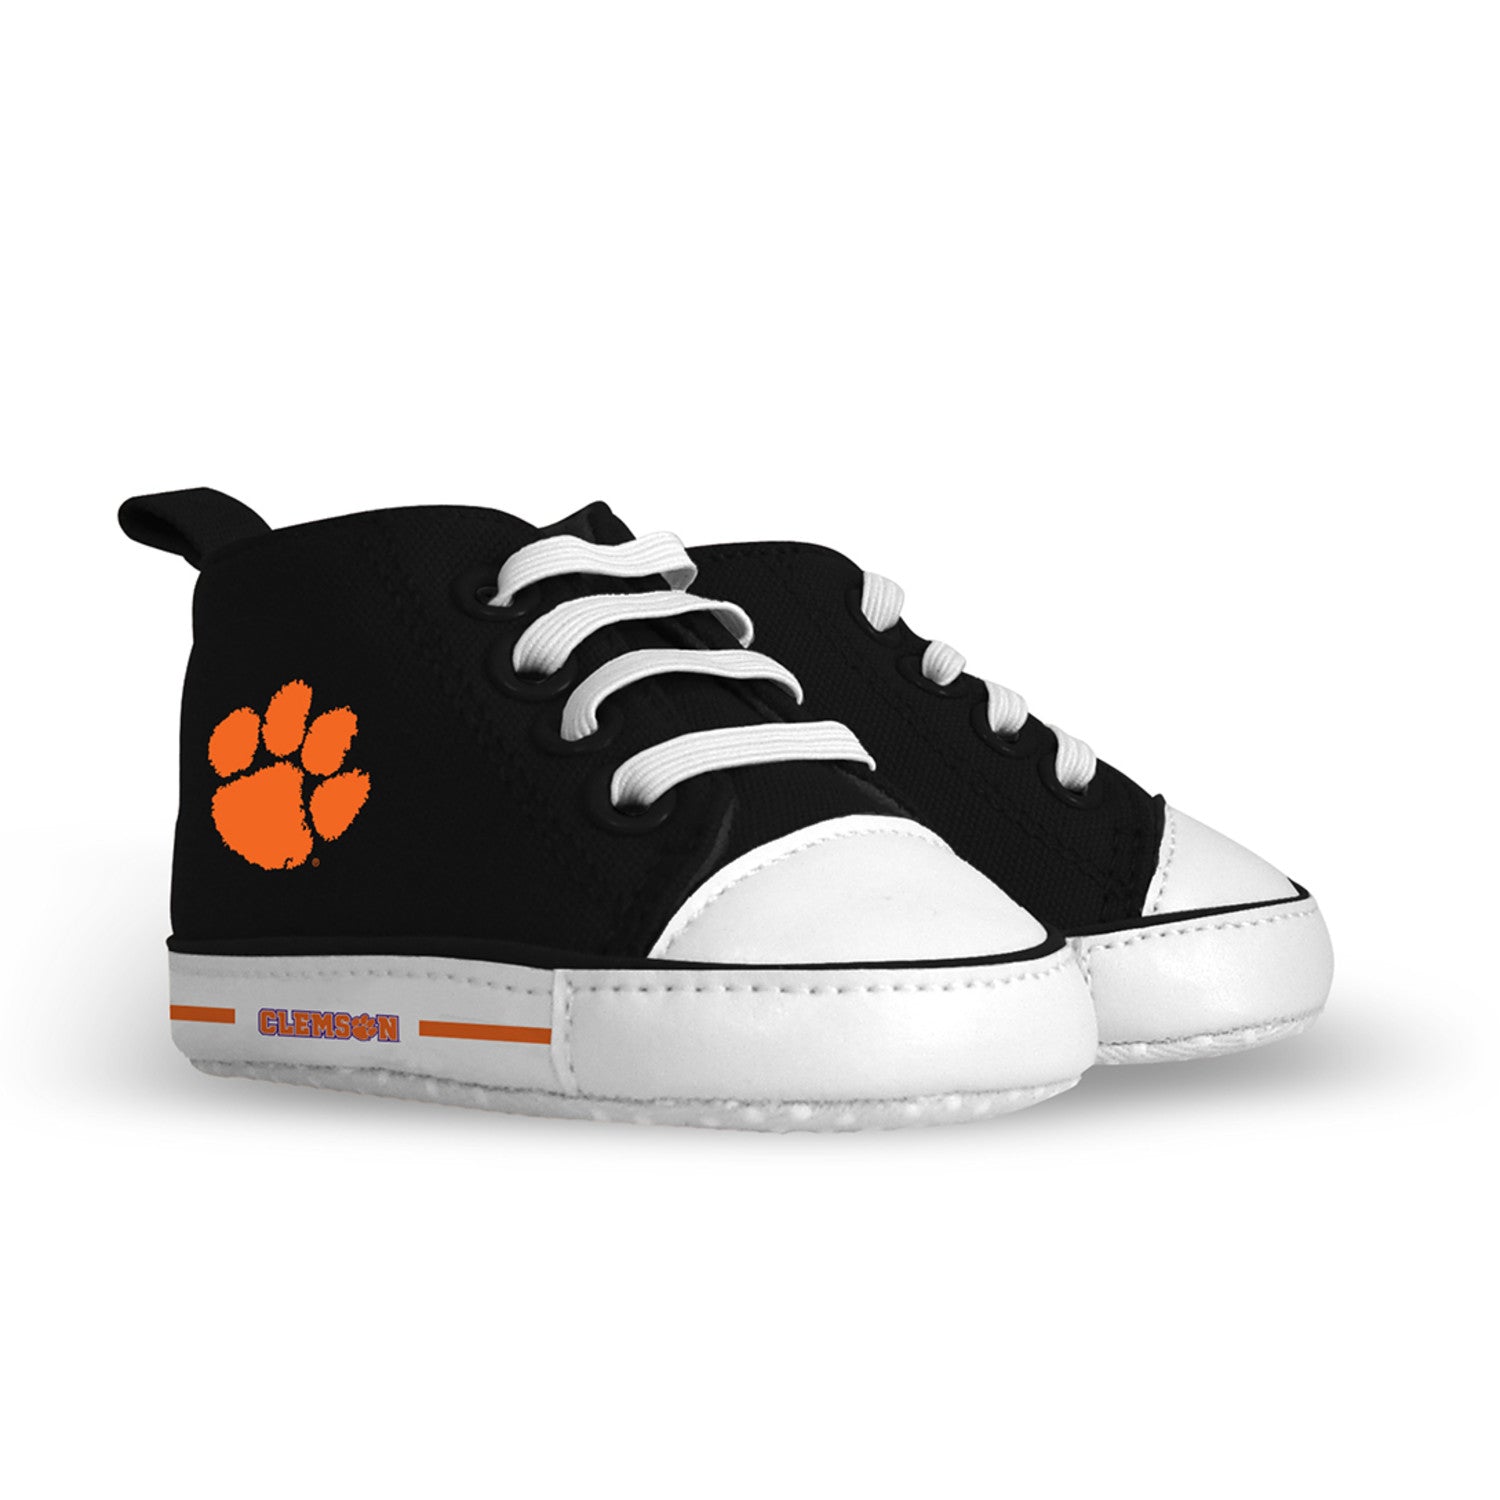 Clemson Tigers Baby Shoes